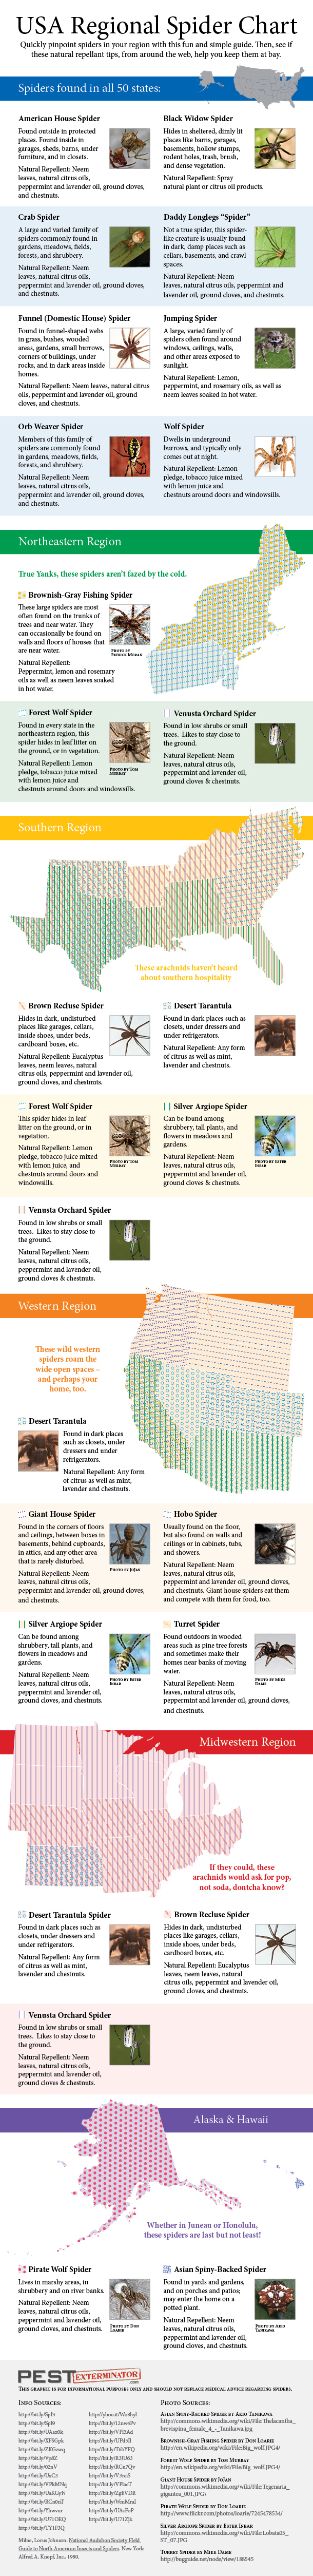 USA Spider Identification Chart Visual.ly